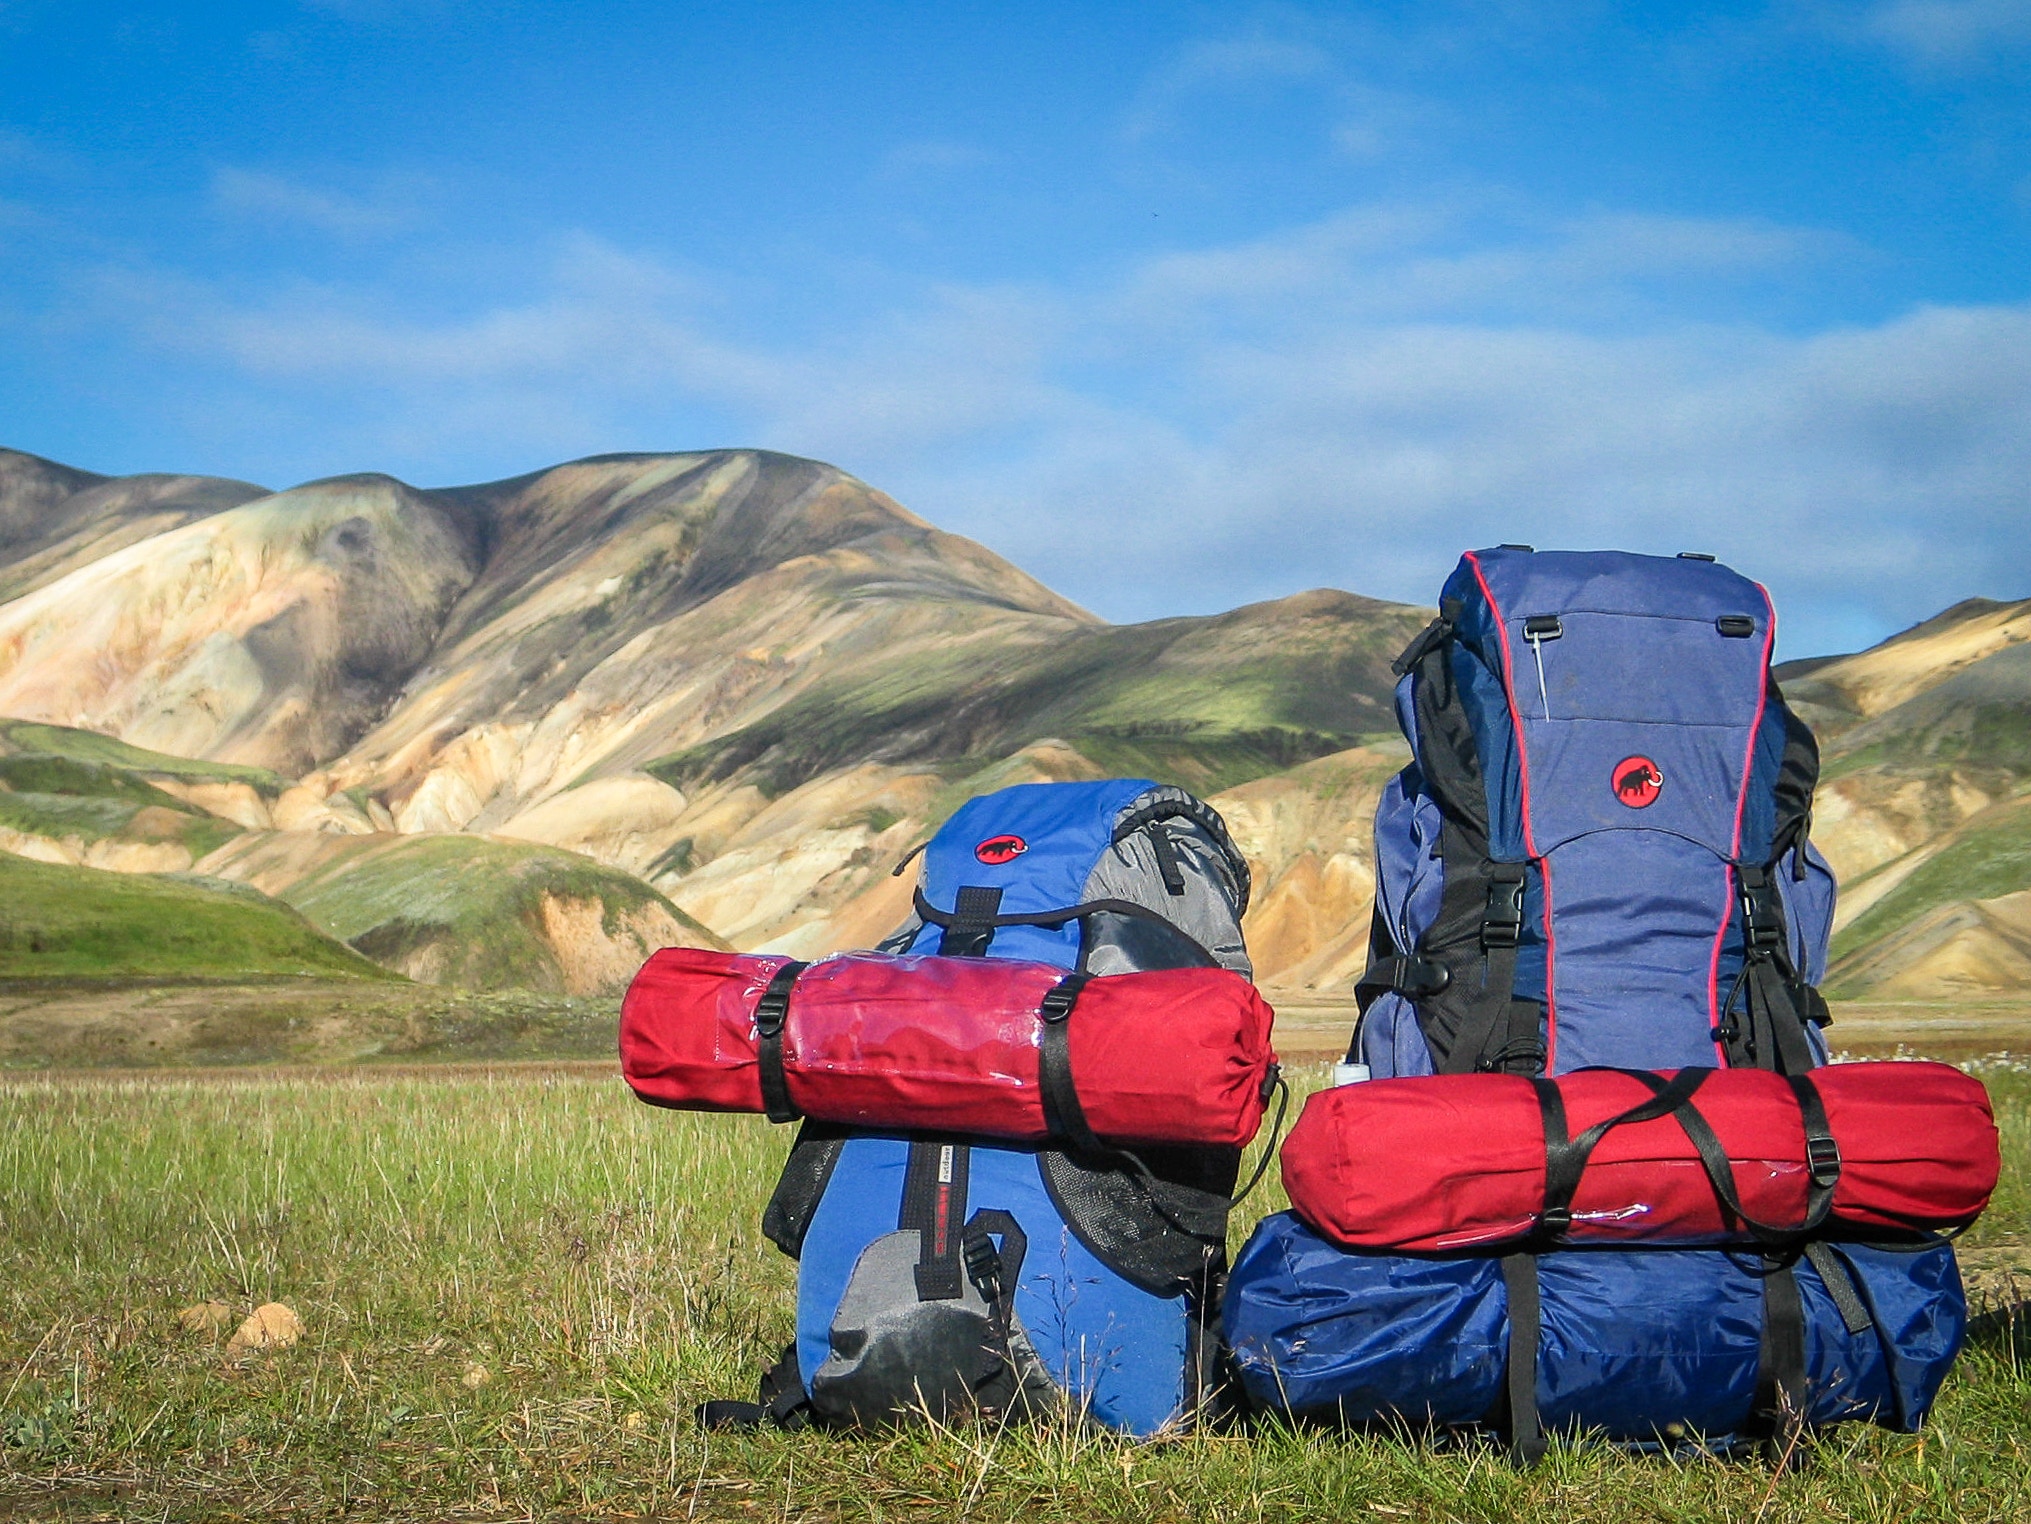 Camping backpack in a field